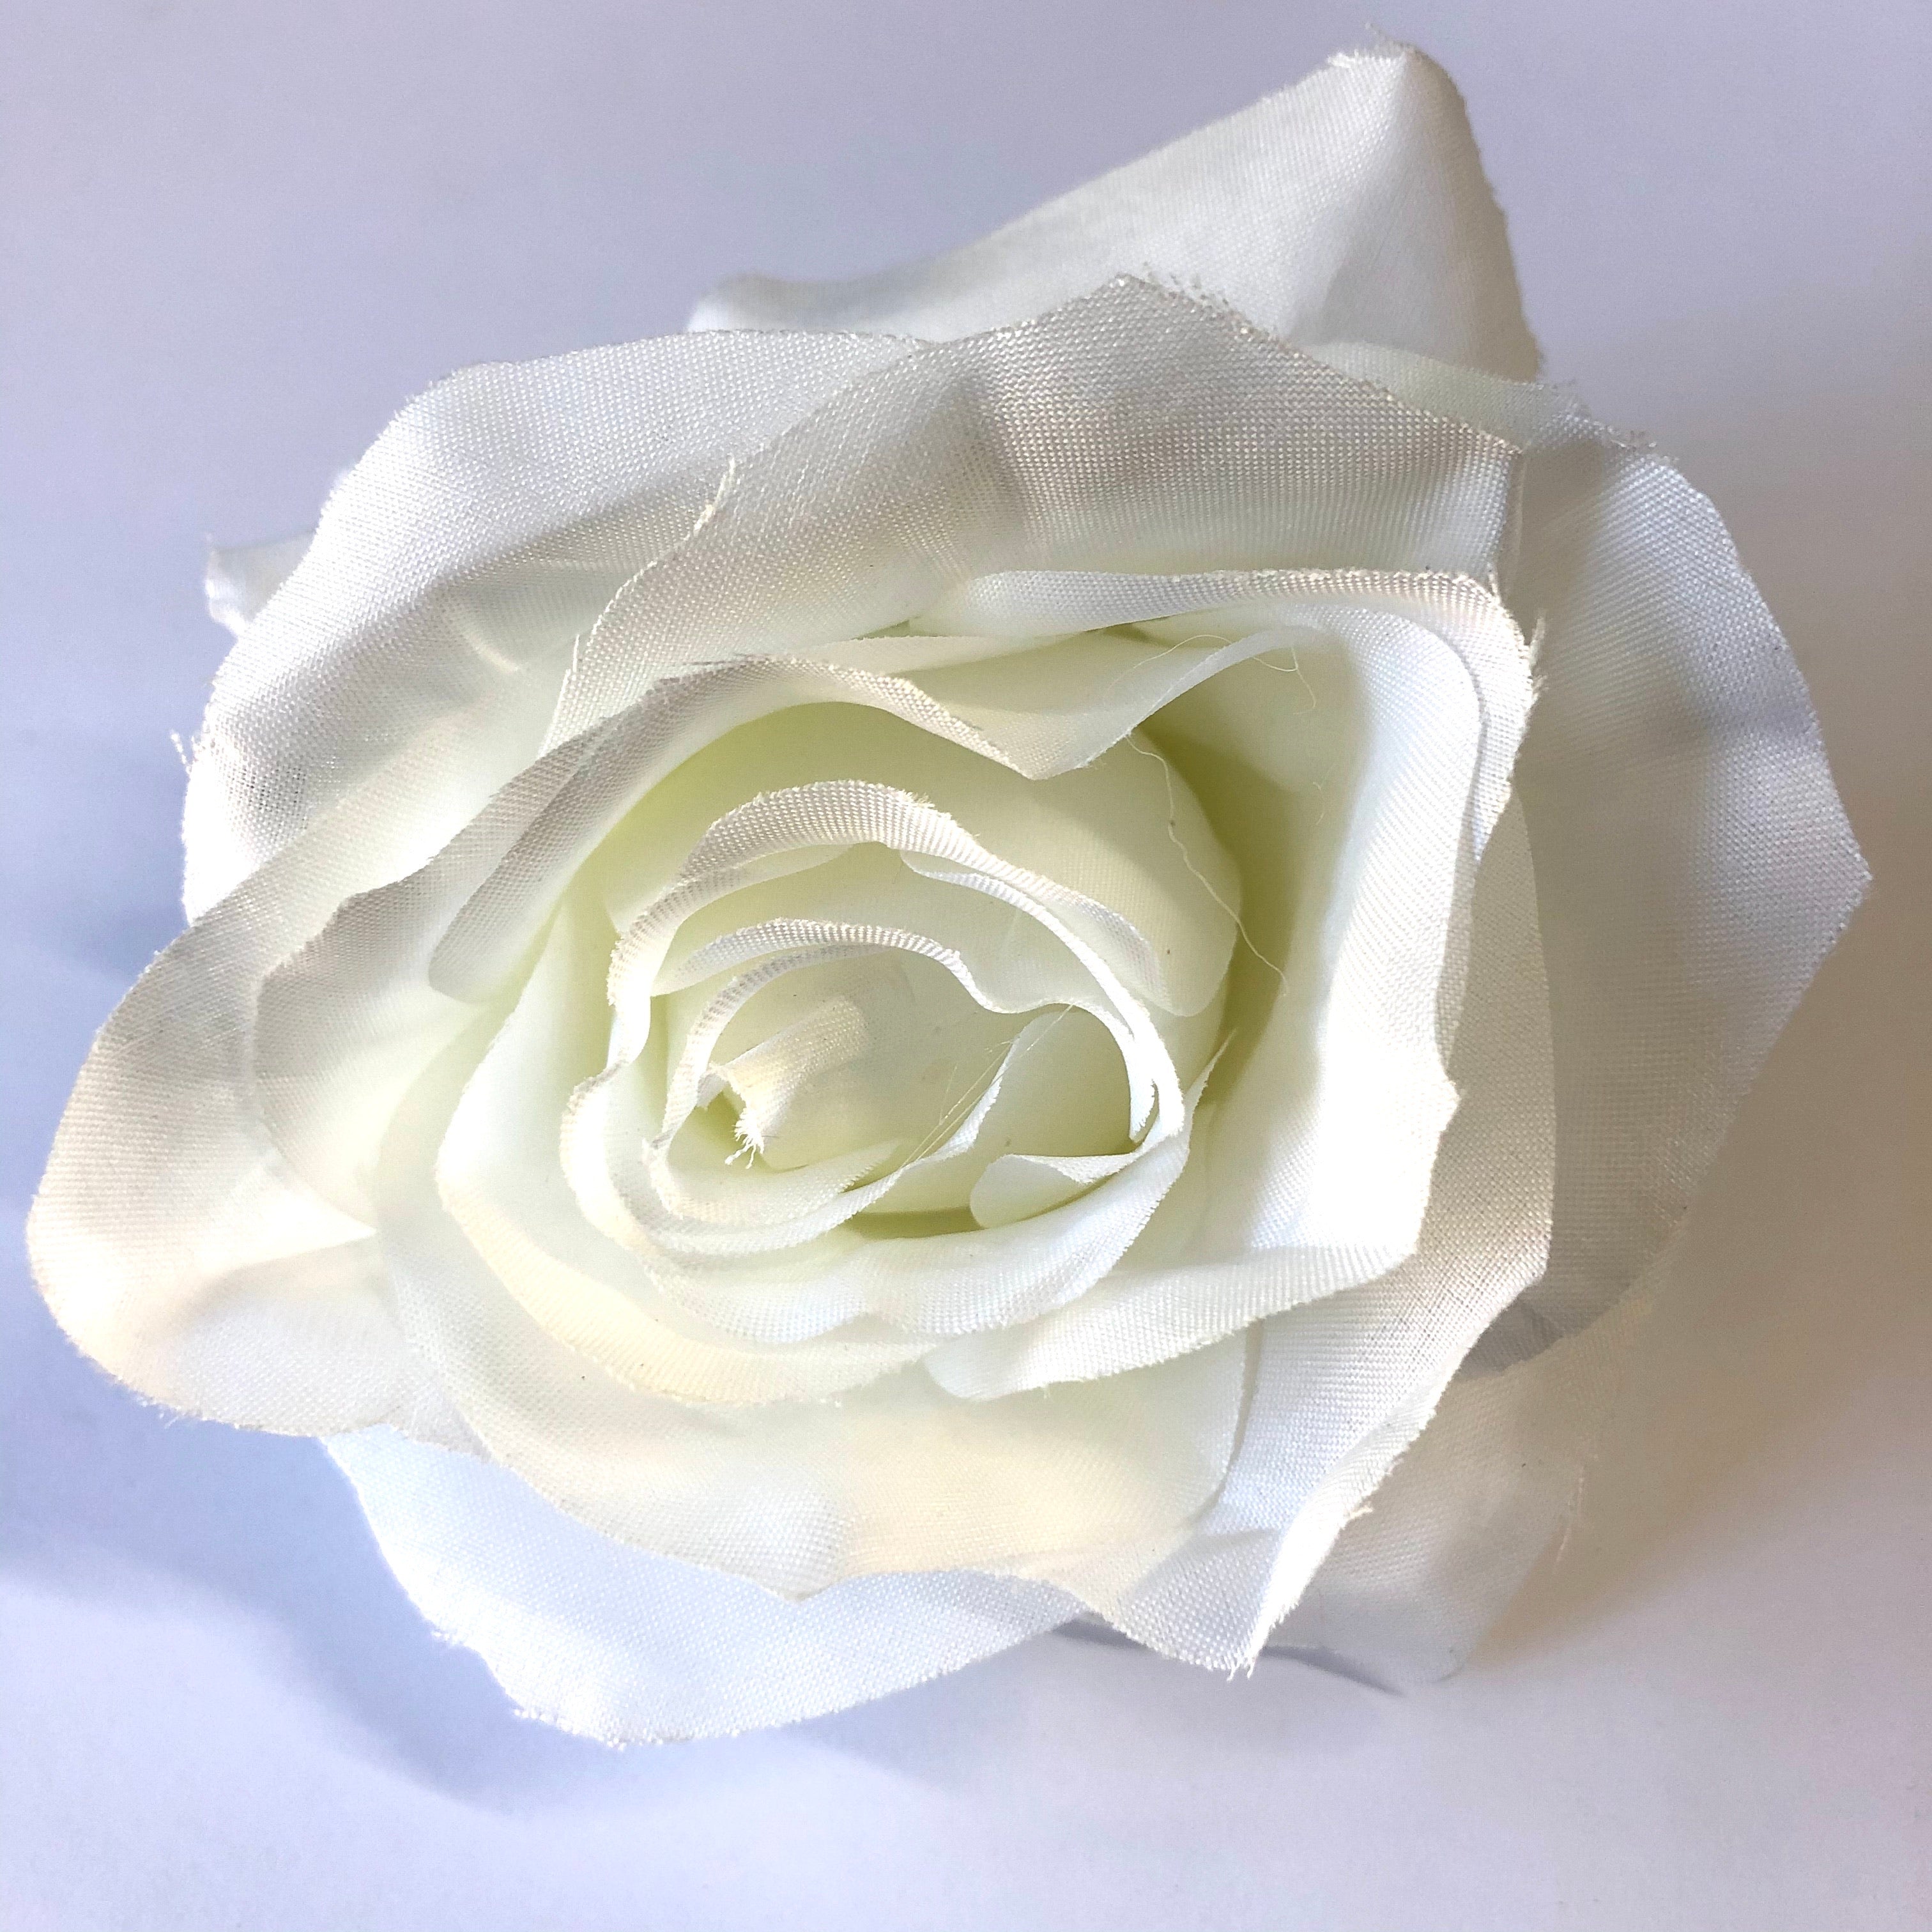 Artificial Silk Flower Head - White Rose Style 111 - 1pc